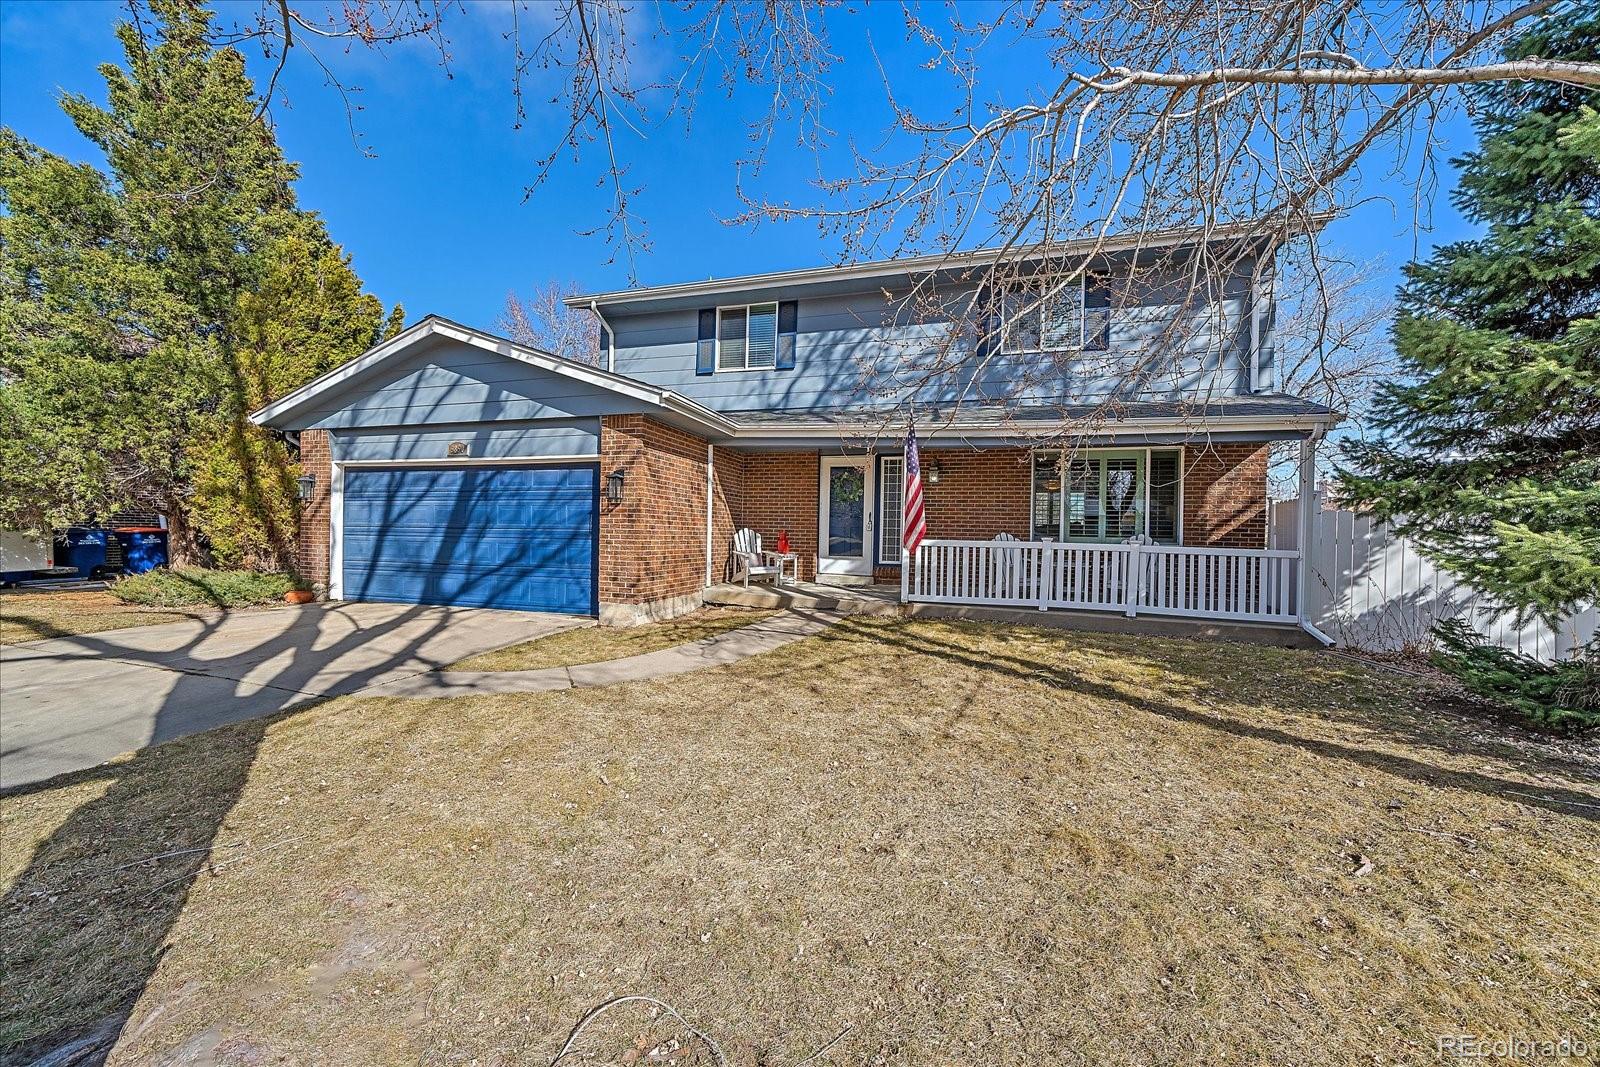 5850  quail street, Arvada sold home. Closed on 2024-03-29 for $645,000.